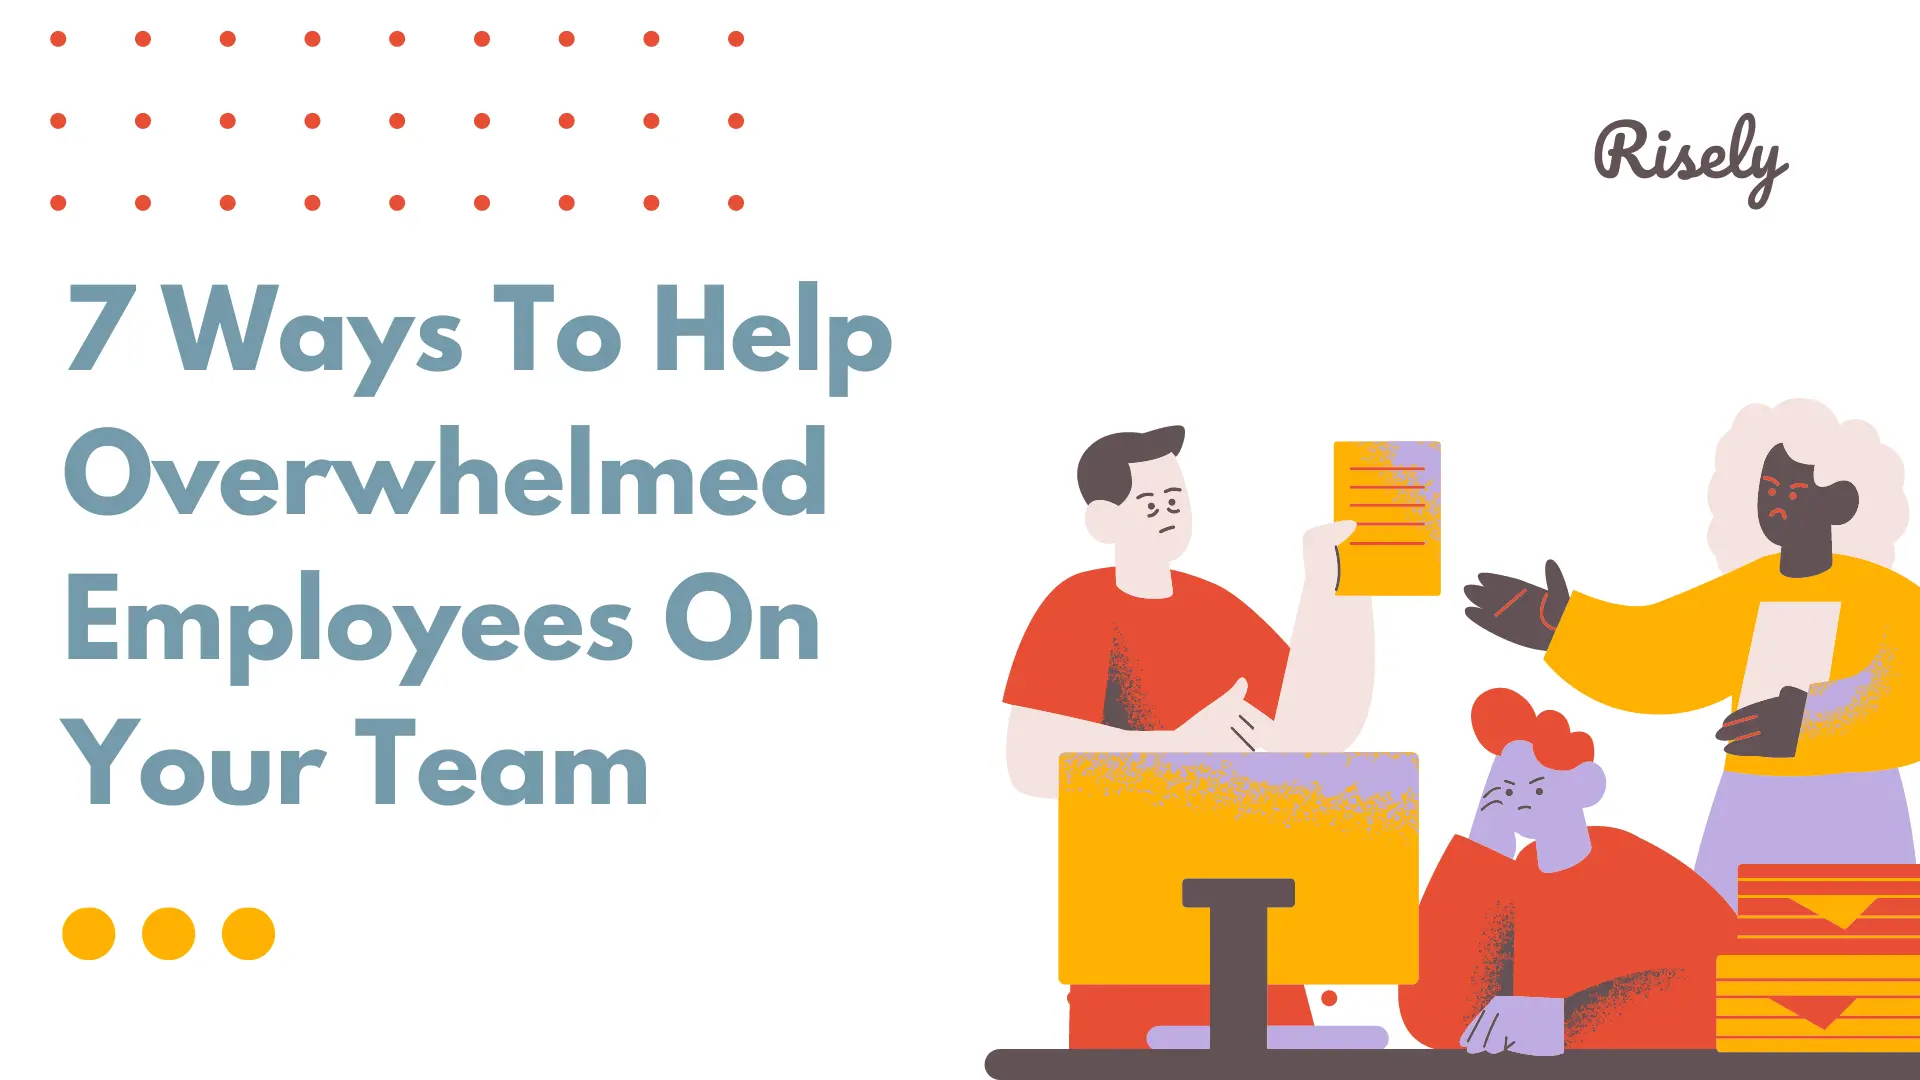 7 Ways To Help Overwhelmed Employees On Your Team